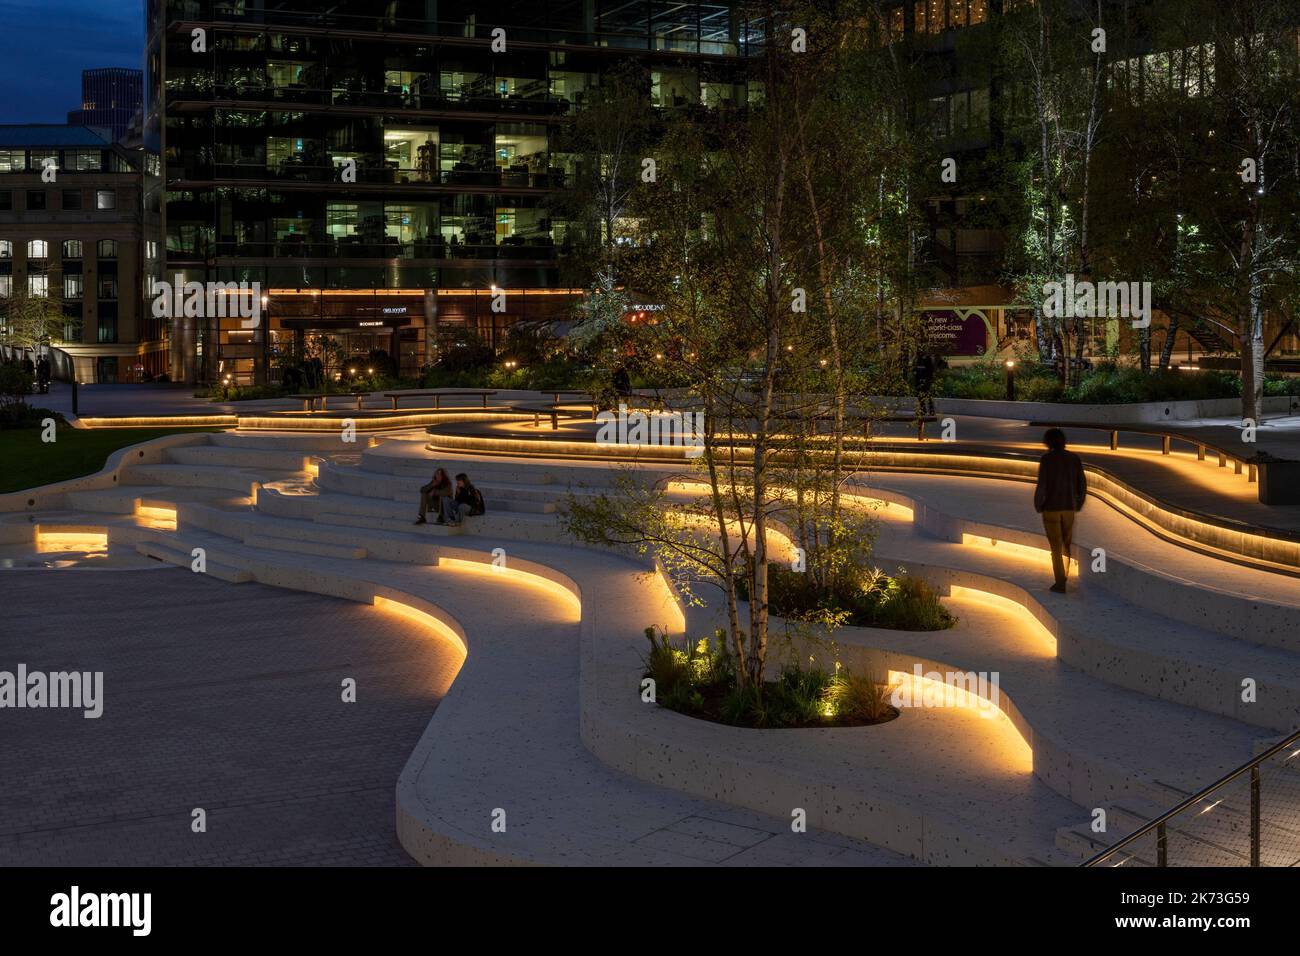 Evening wide view across square with city in background. Exchange Square, London, United Kingdom. Architect: DSDHA, 2022. Stock Photo